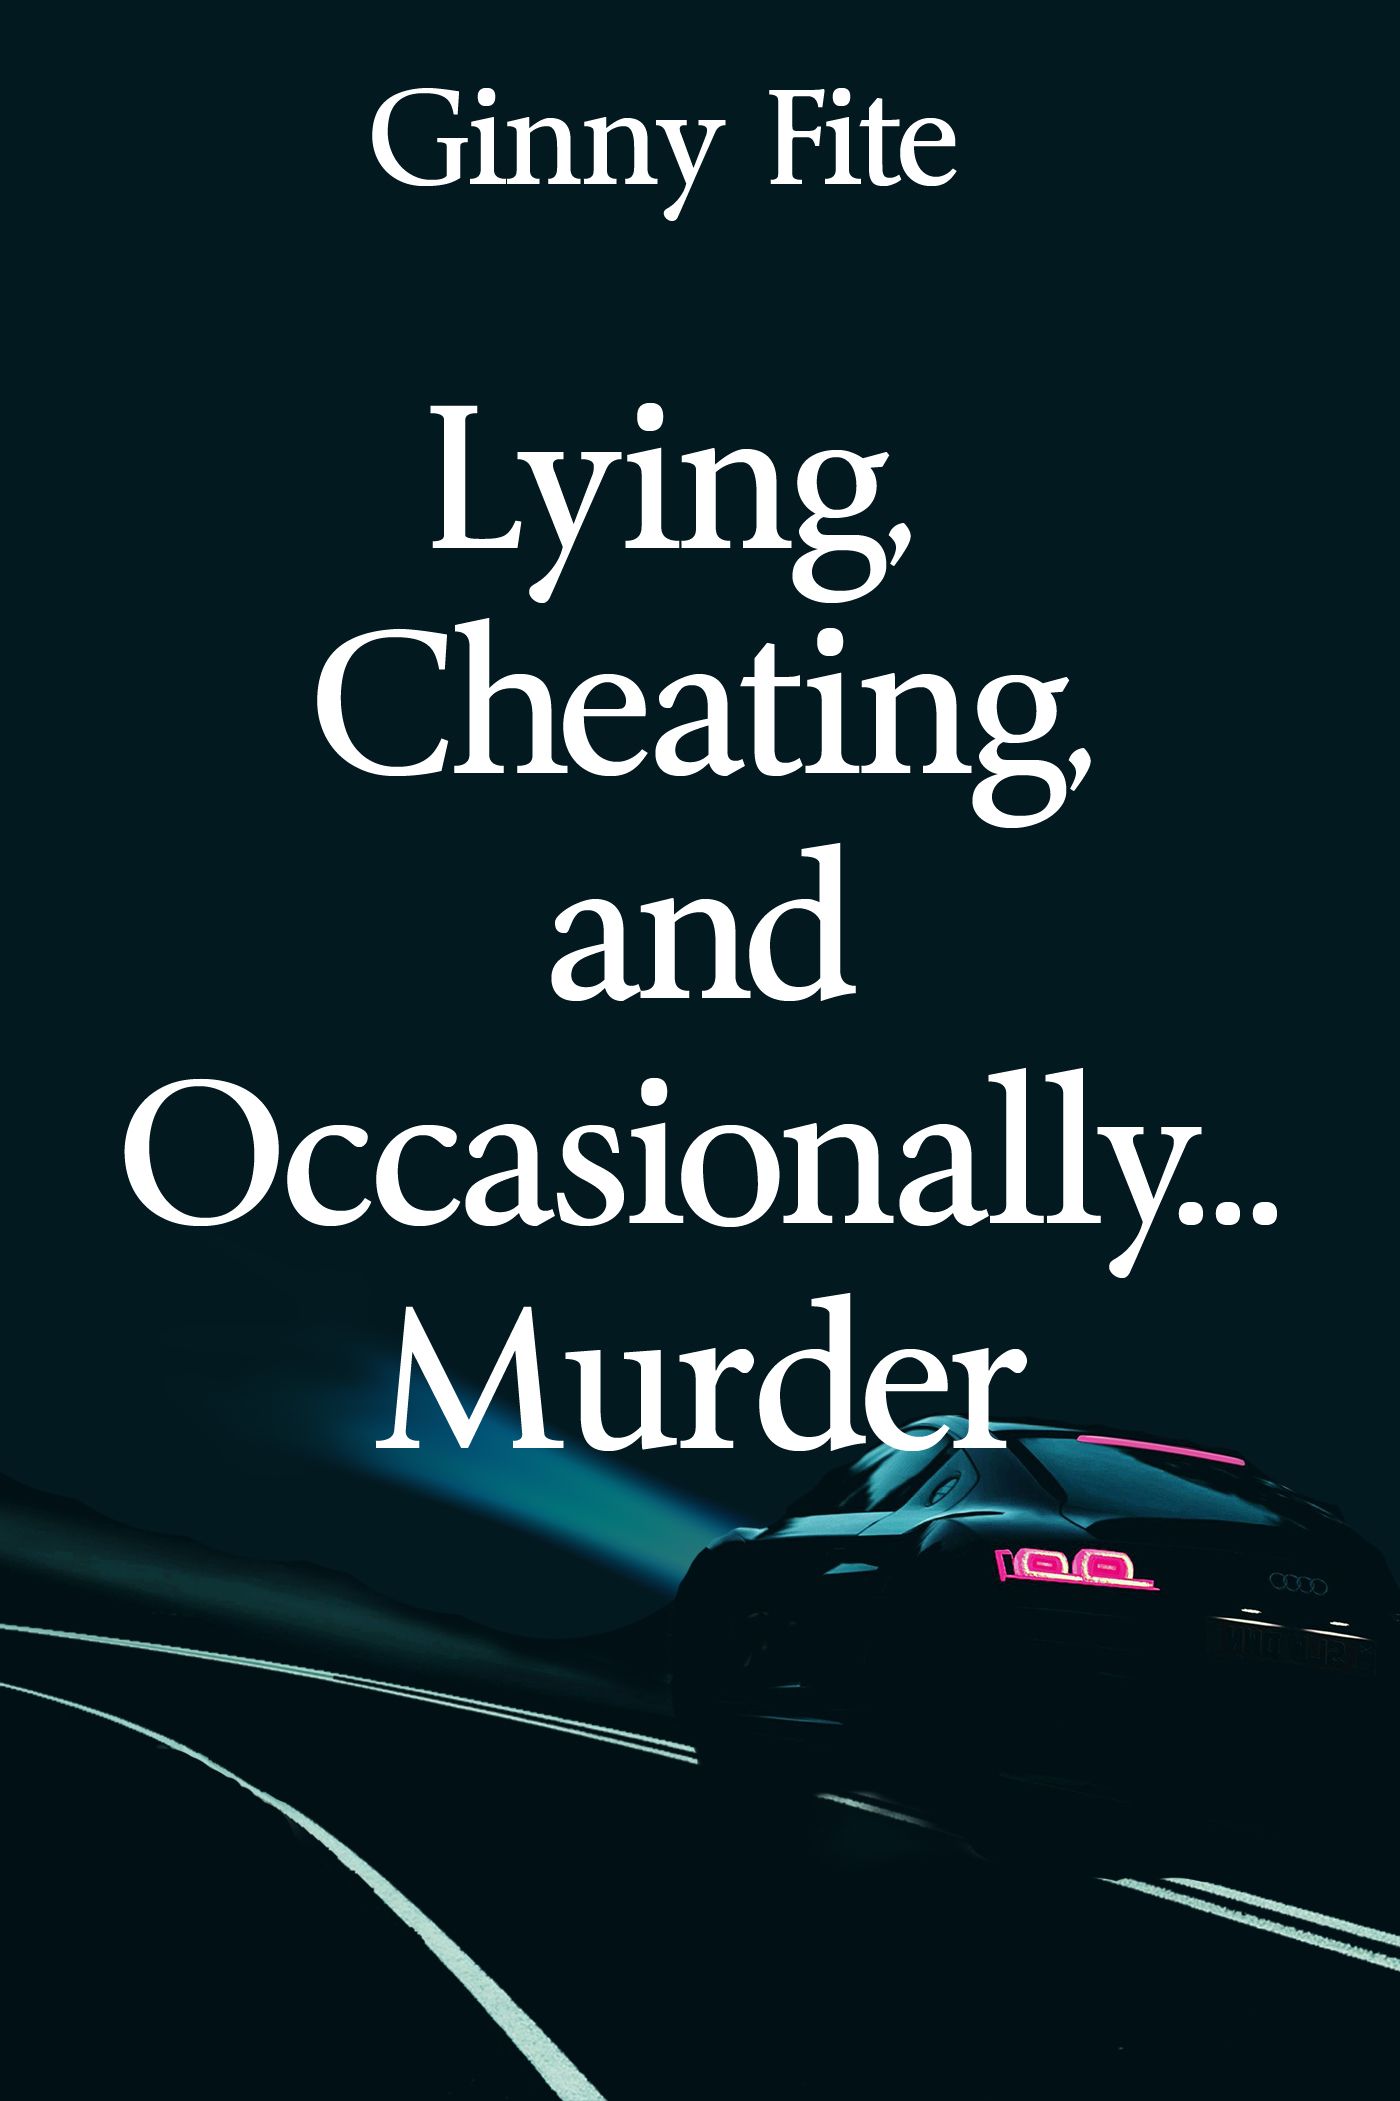 Lying, Cheating, and Occasionally Murder by Ginny Fite